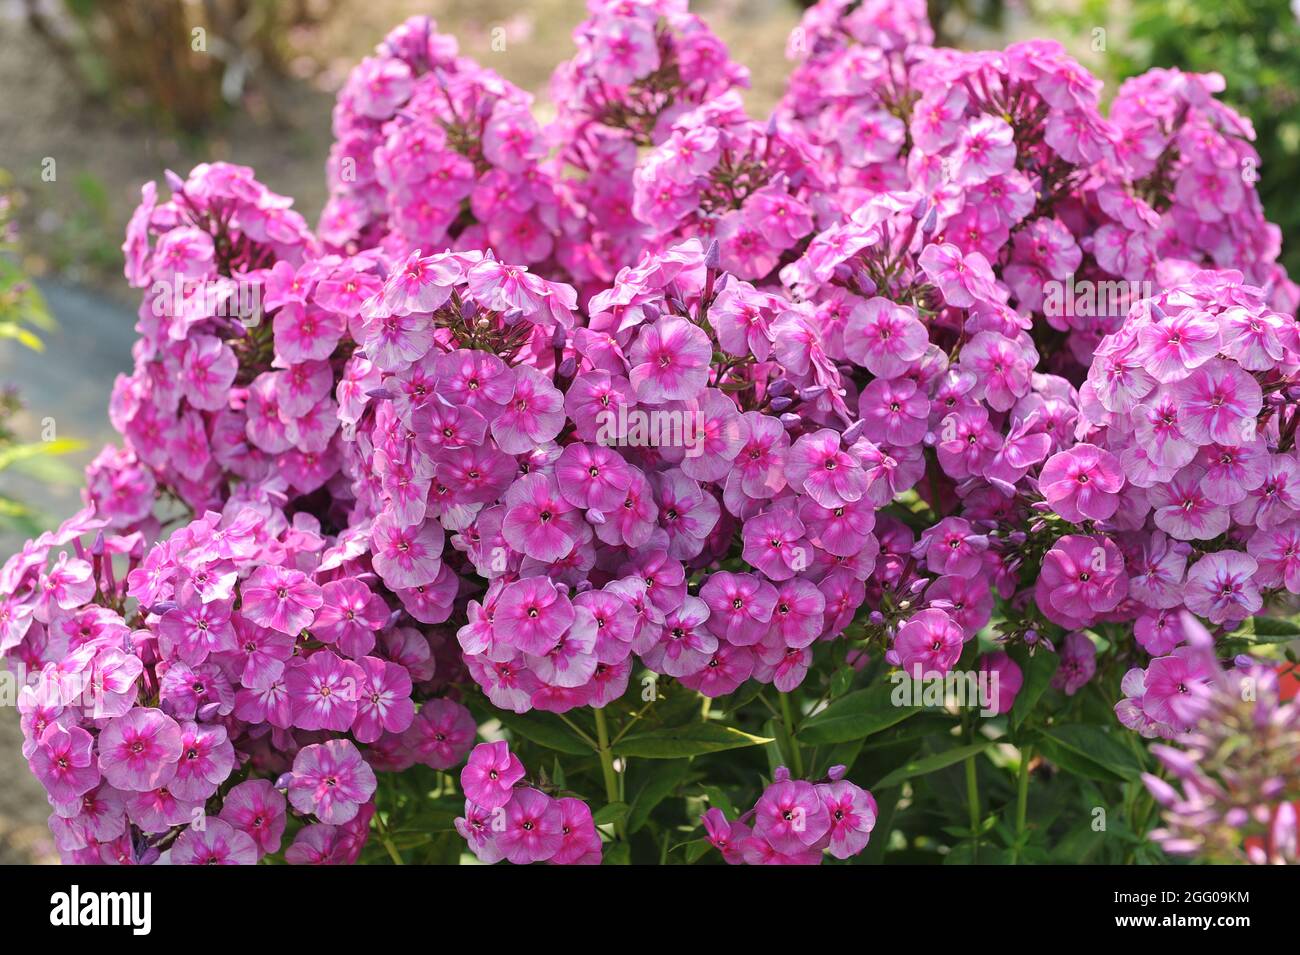 Pink phlox paniculata Zhostovsky Souvenir with a silvery smoky pattern blooms in a garden in July Stock Photo